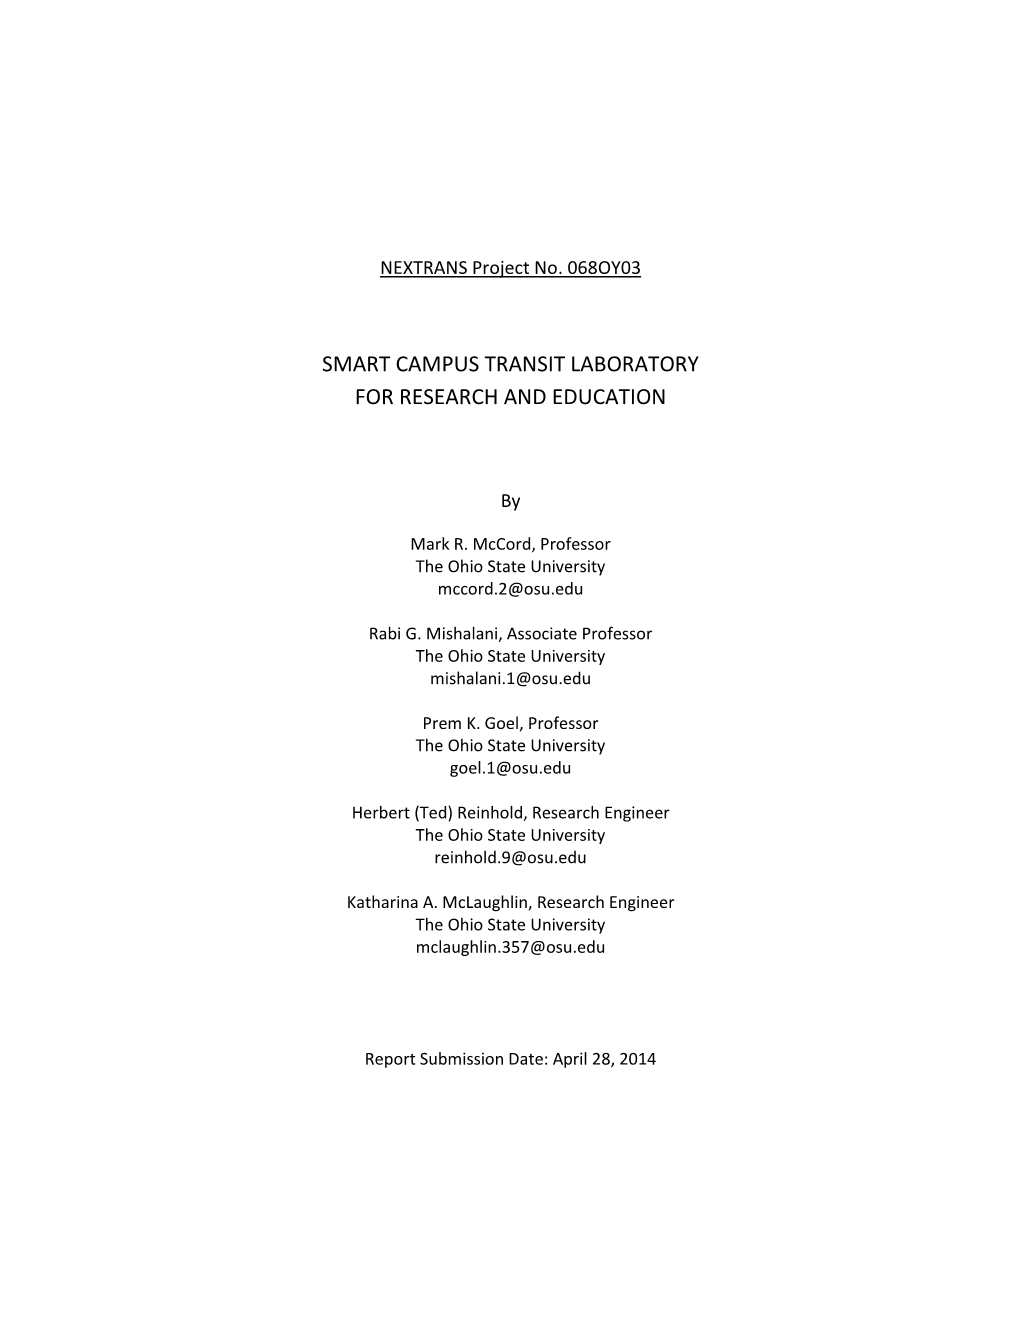 Smart Campus Transit Laboratory for Research and Education